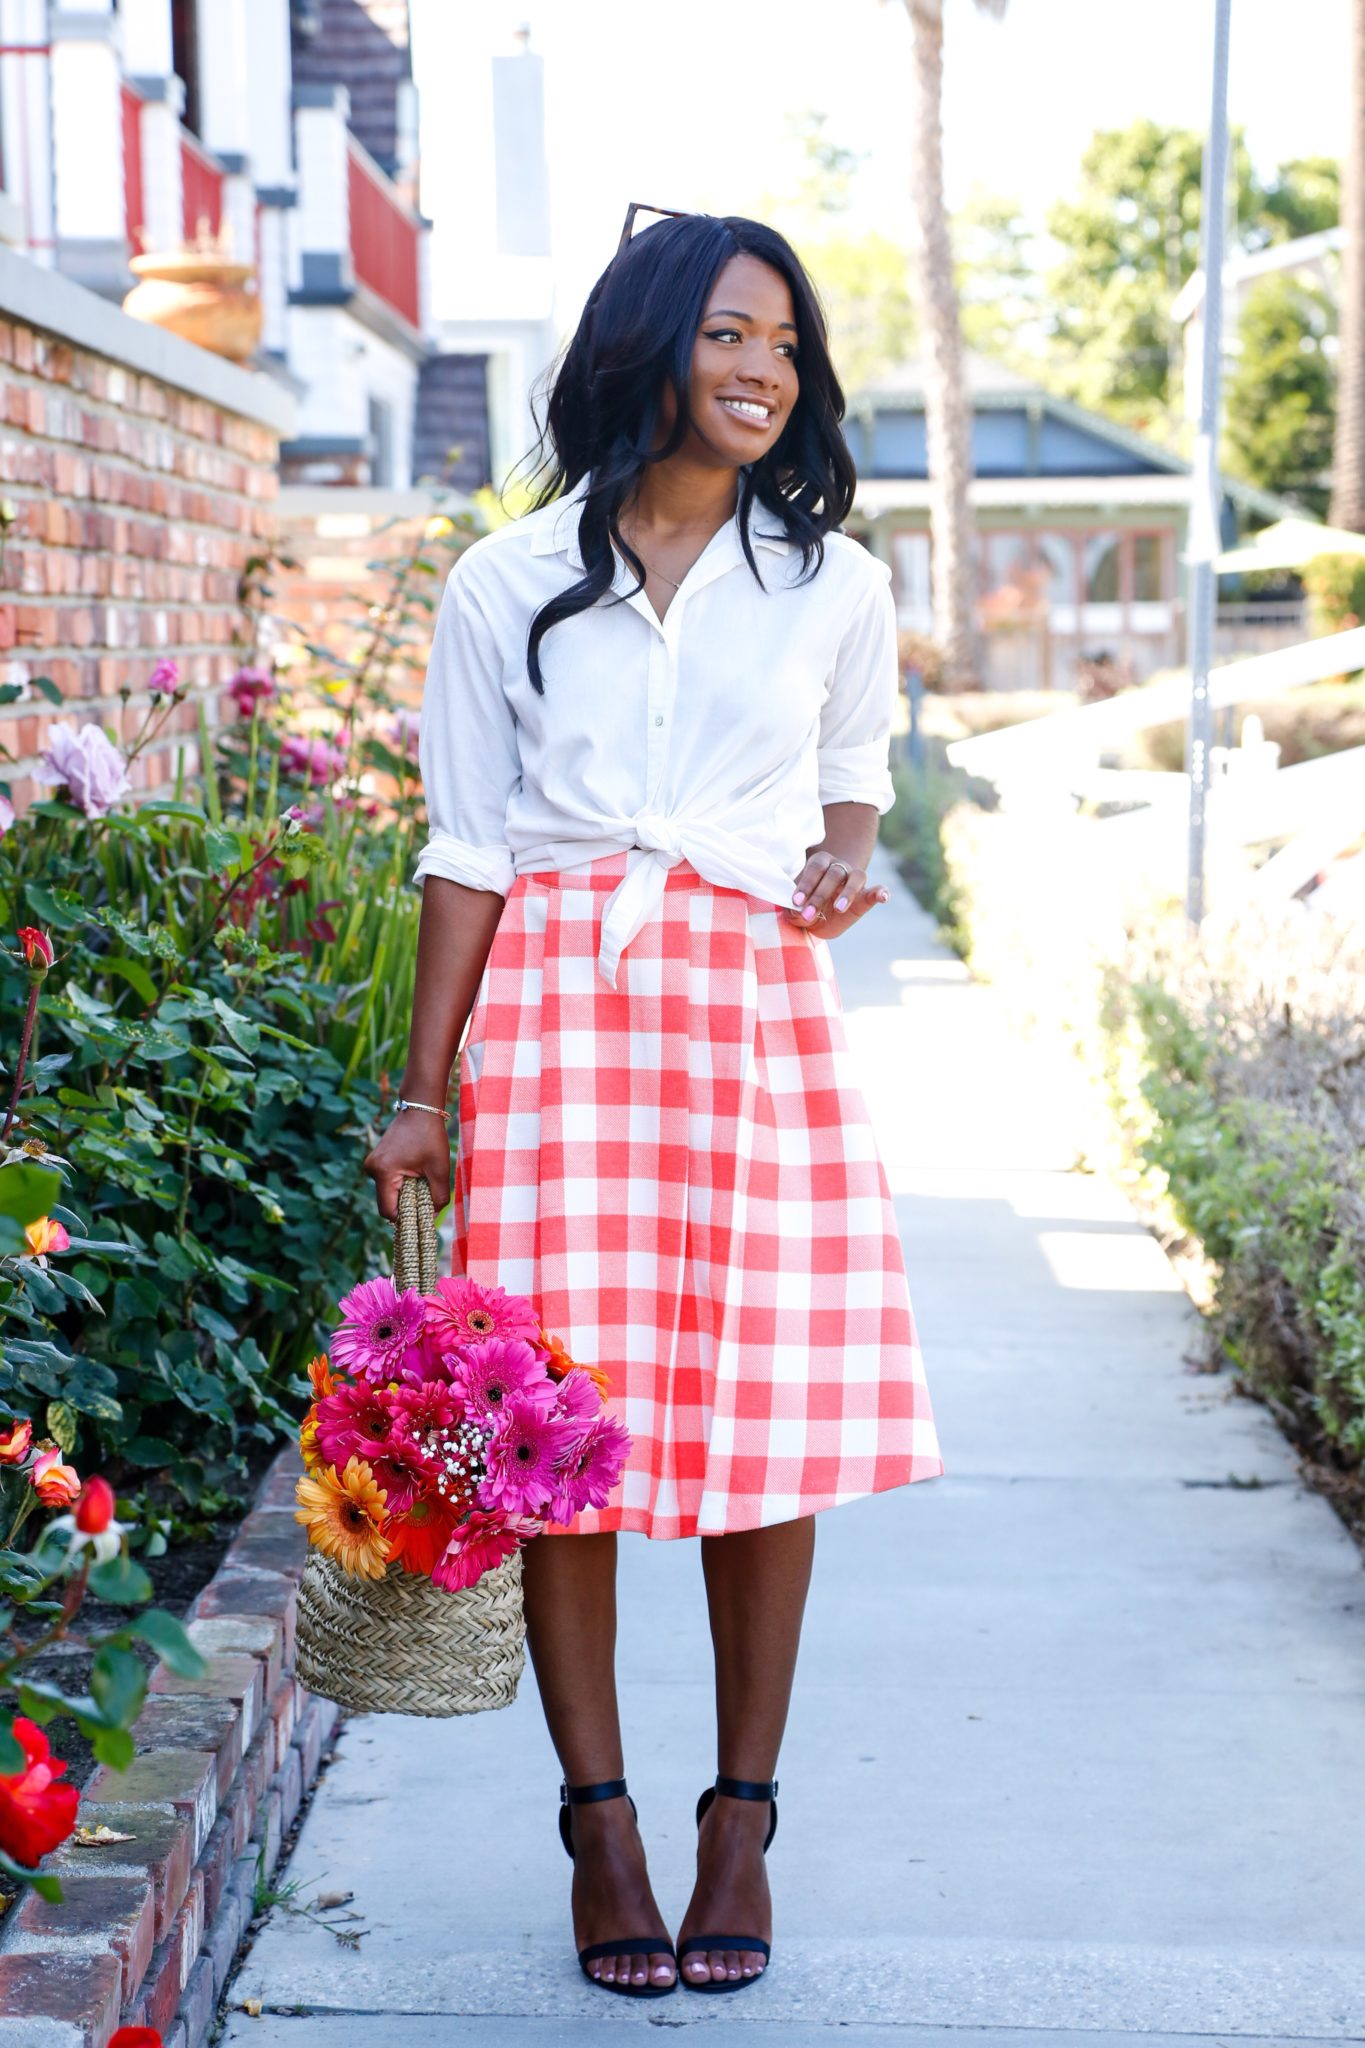 Gingham + Flowers on DowntownDemure.com - Modest Fashion Blog